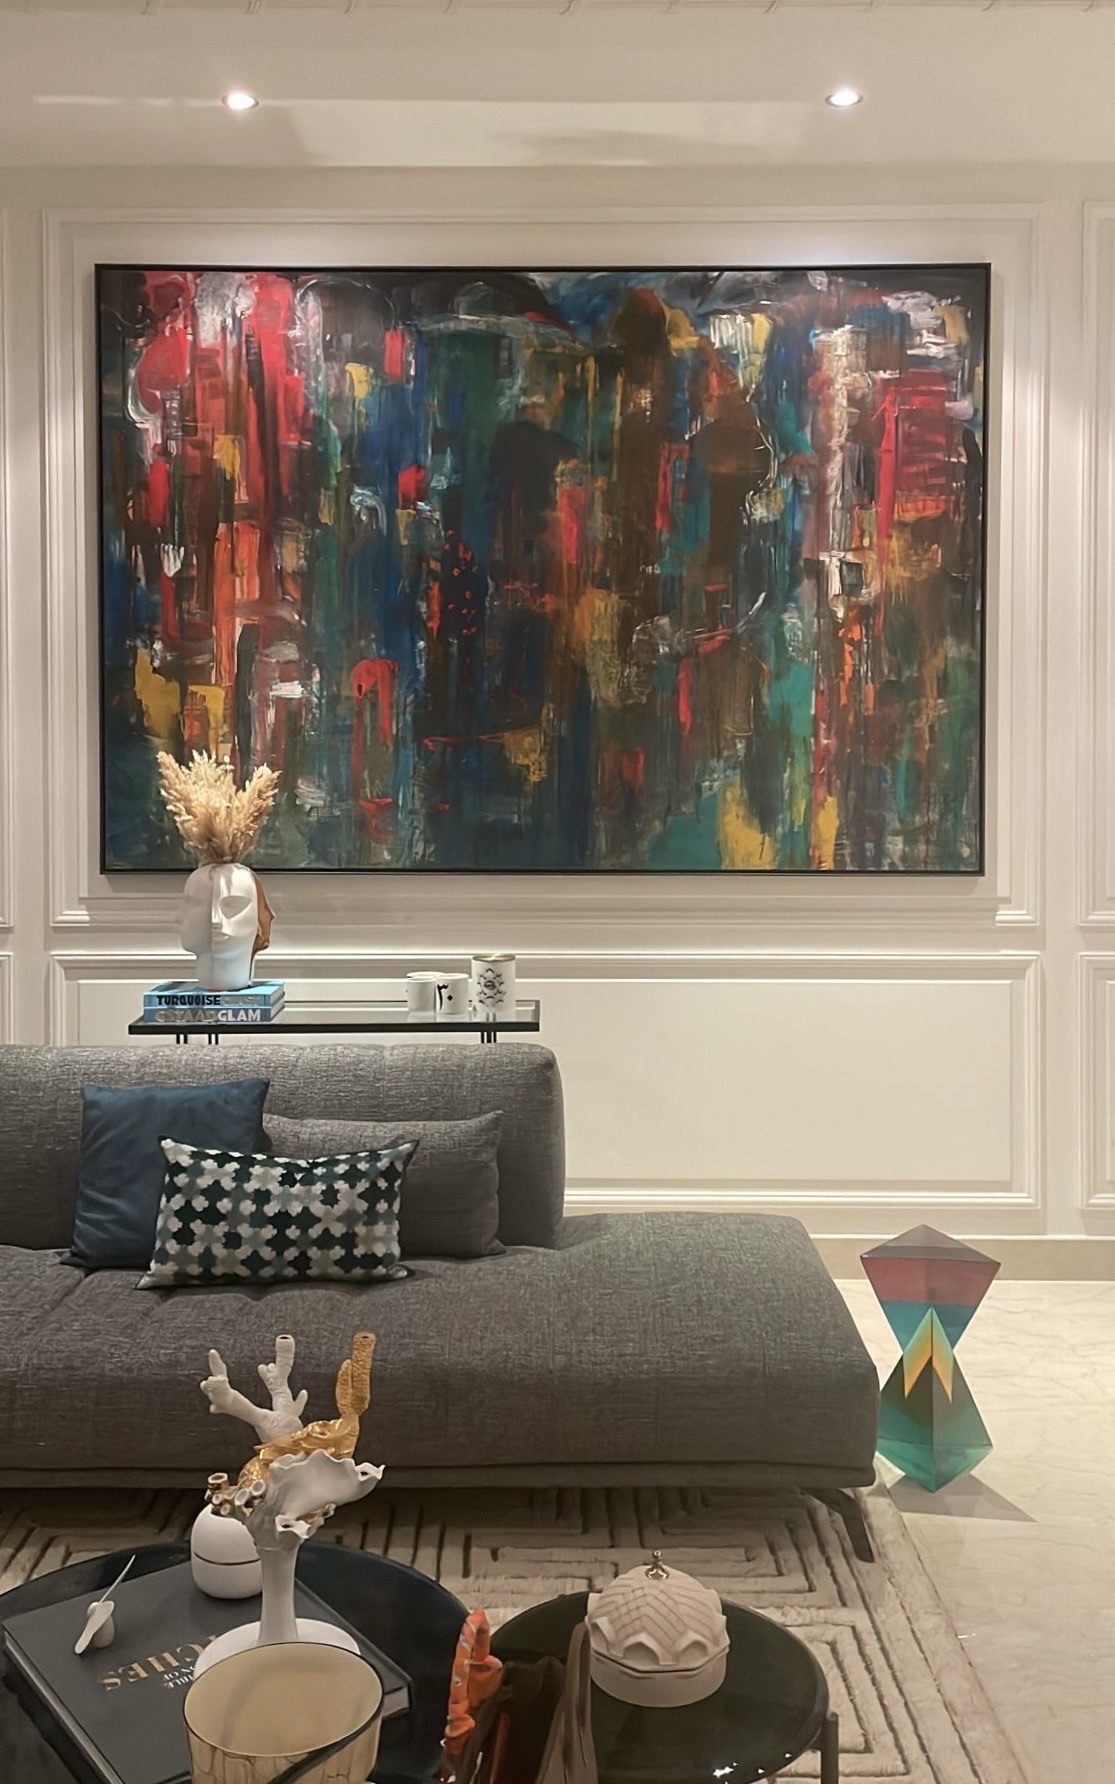 Painting by Mohamed El Jardawi curated by Liwan Gallery at a client's home.